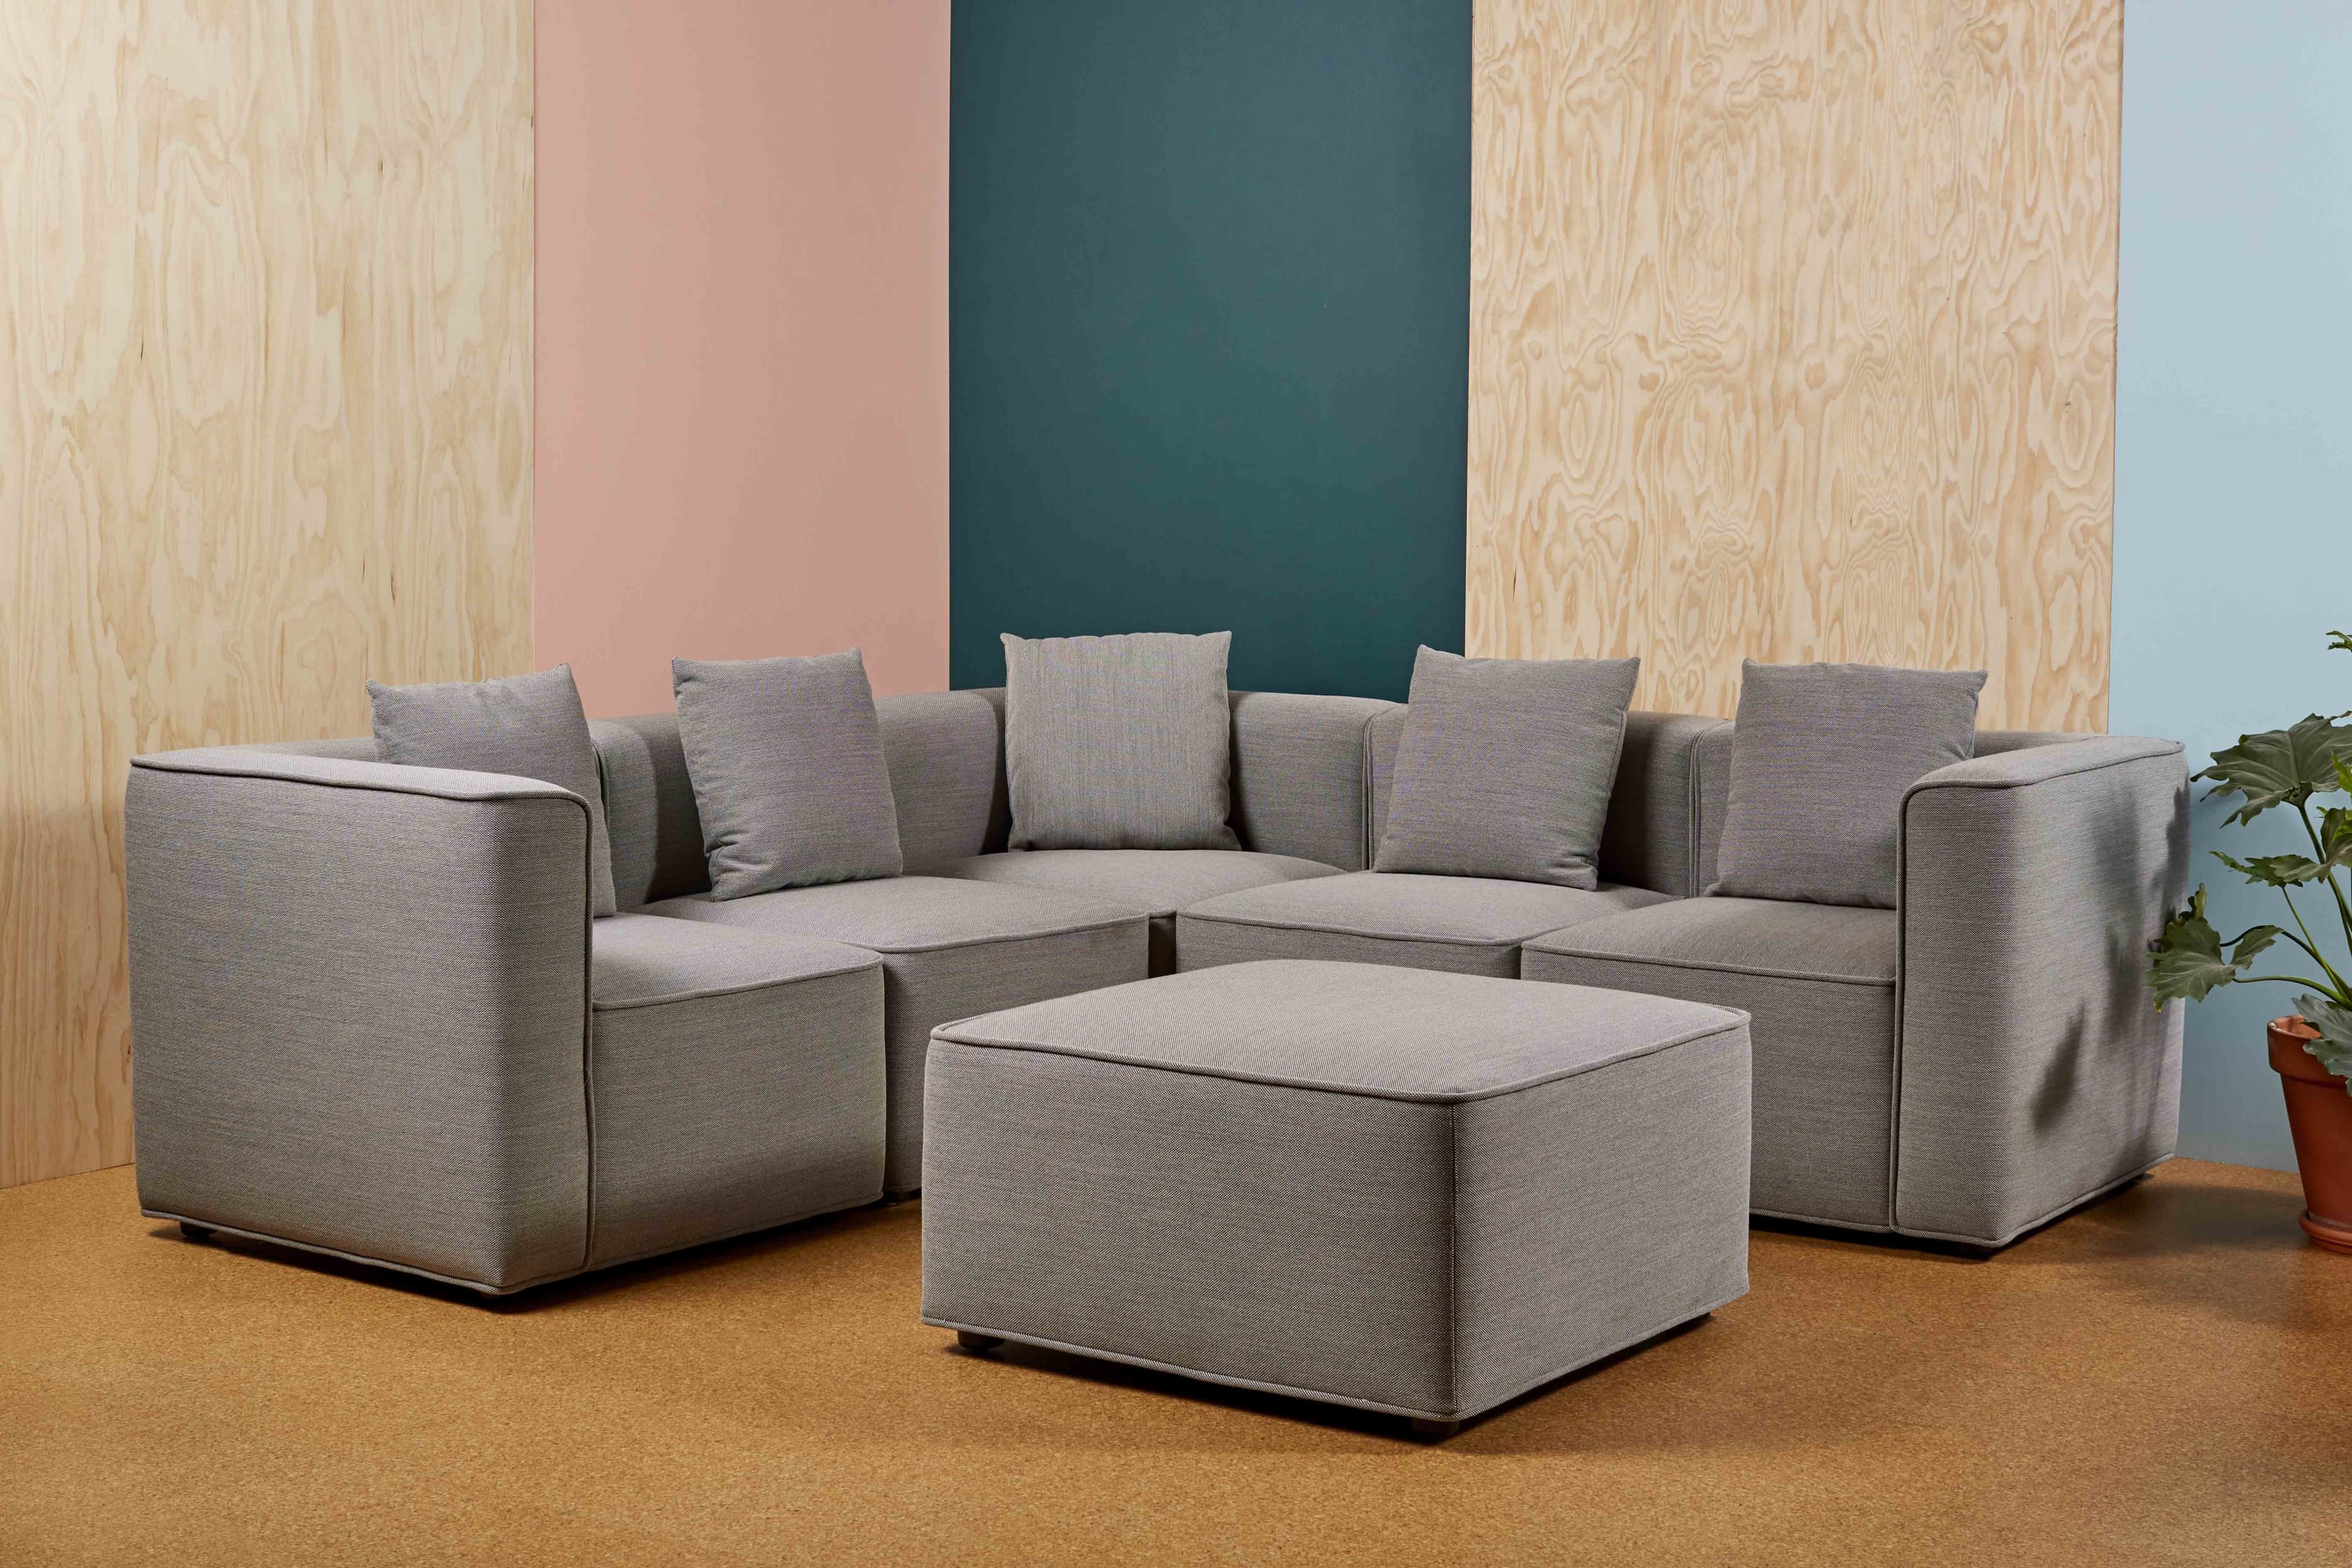 Corral Lounge Seating | Allsteel